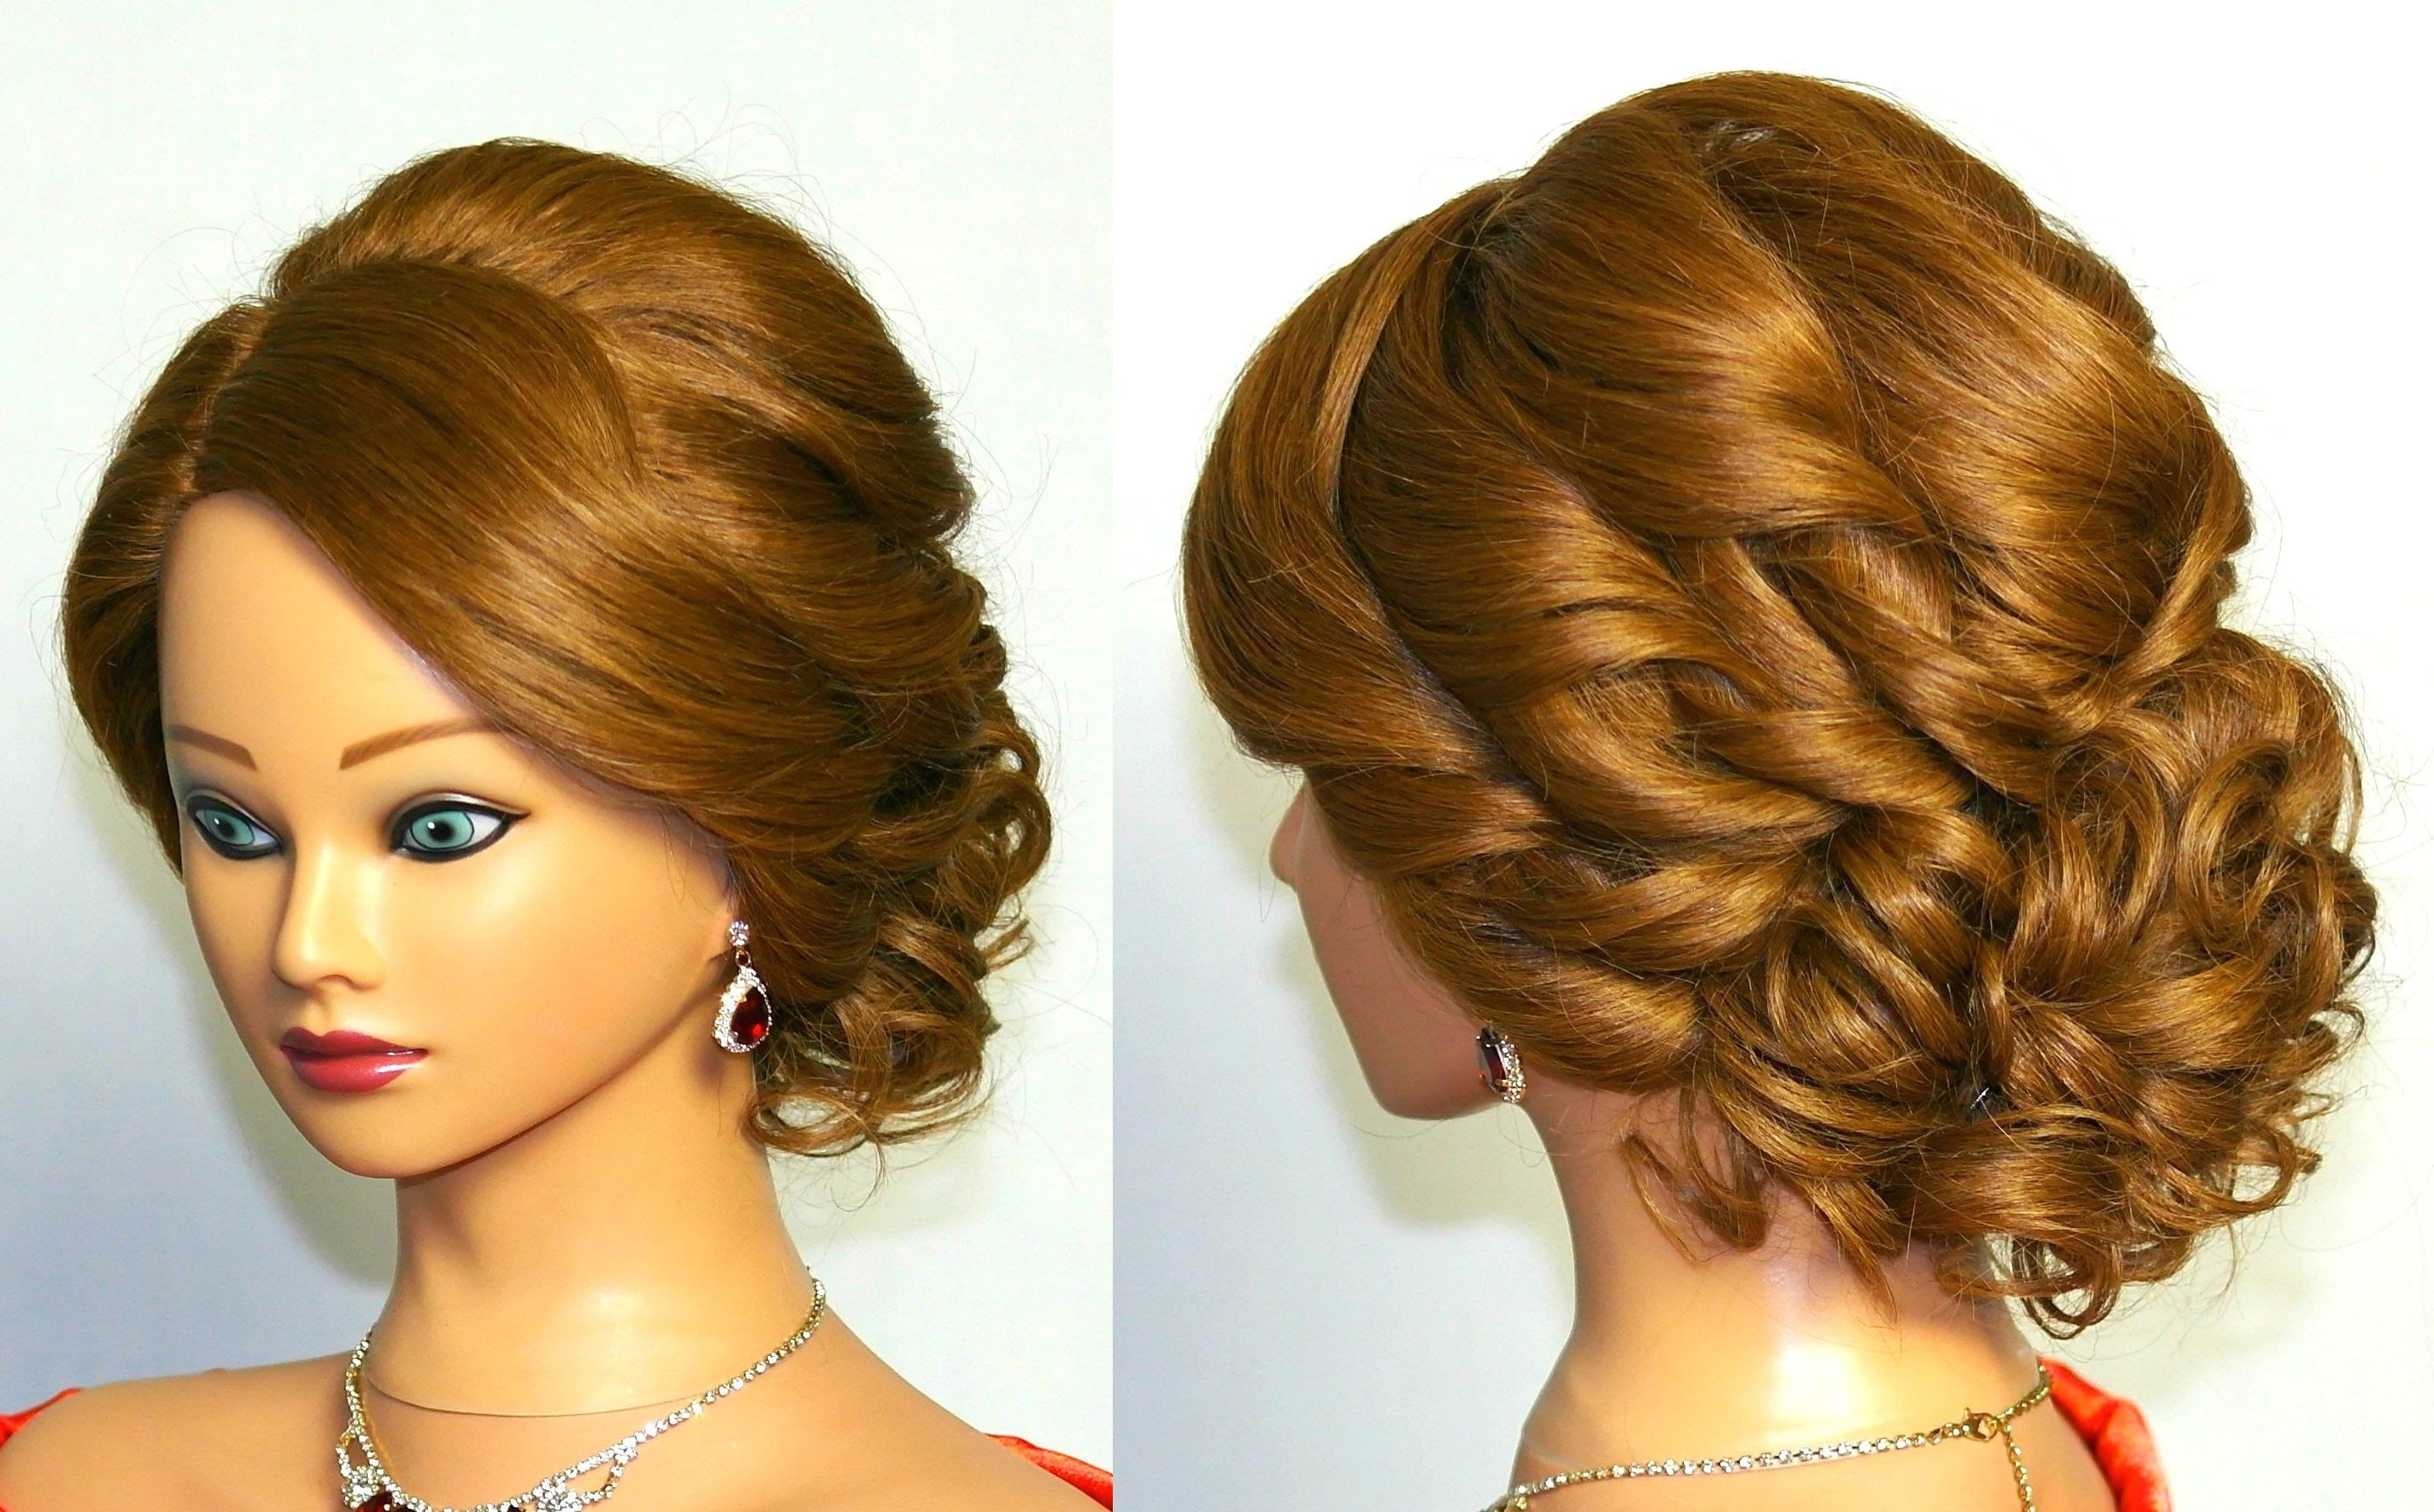 Bridal Curly Updo. Hairstyle For Medium Hair (View 1 of 15)